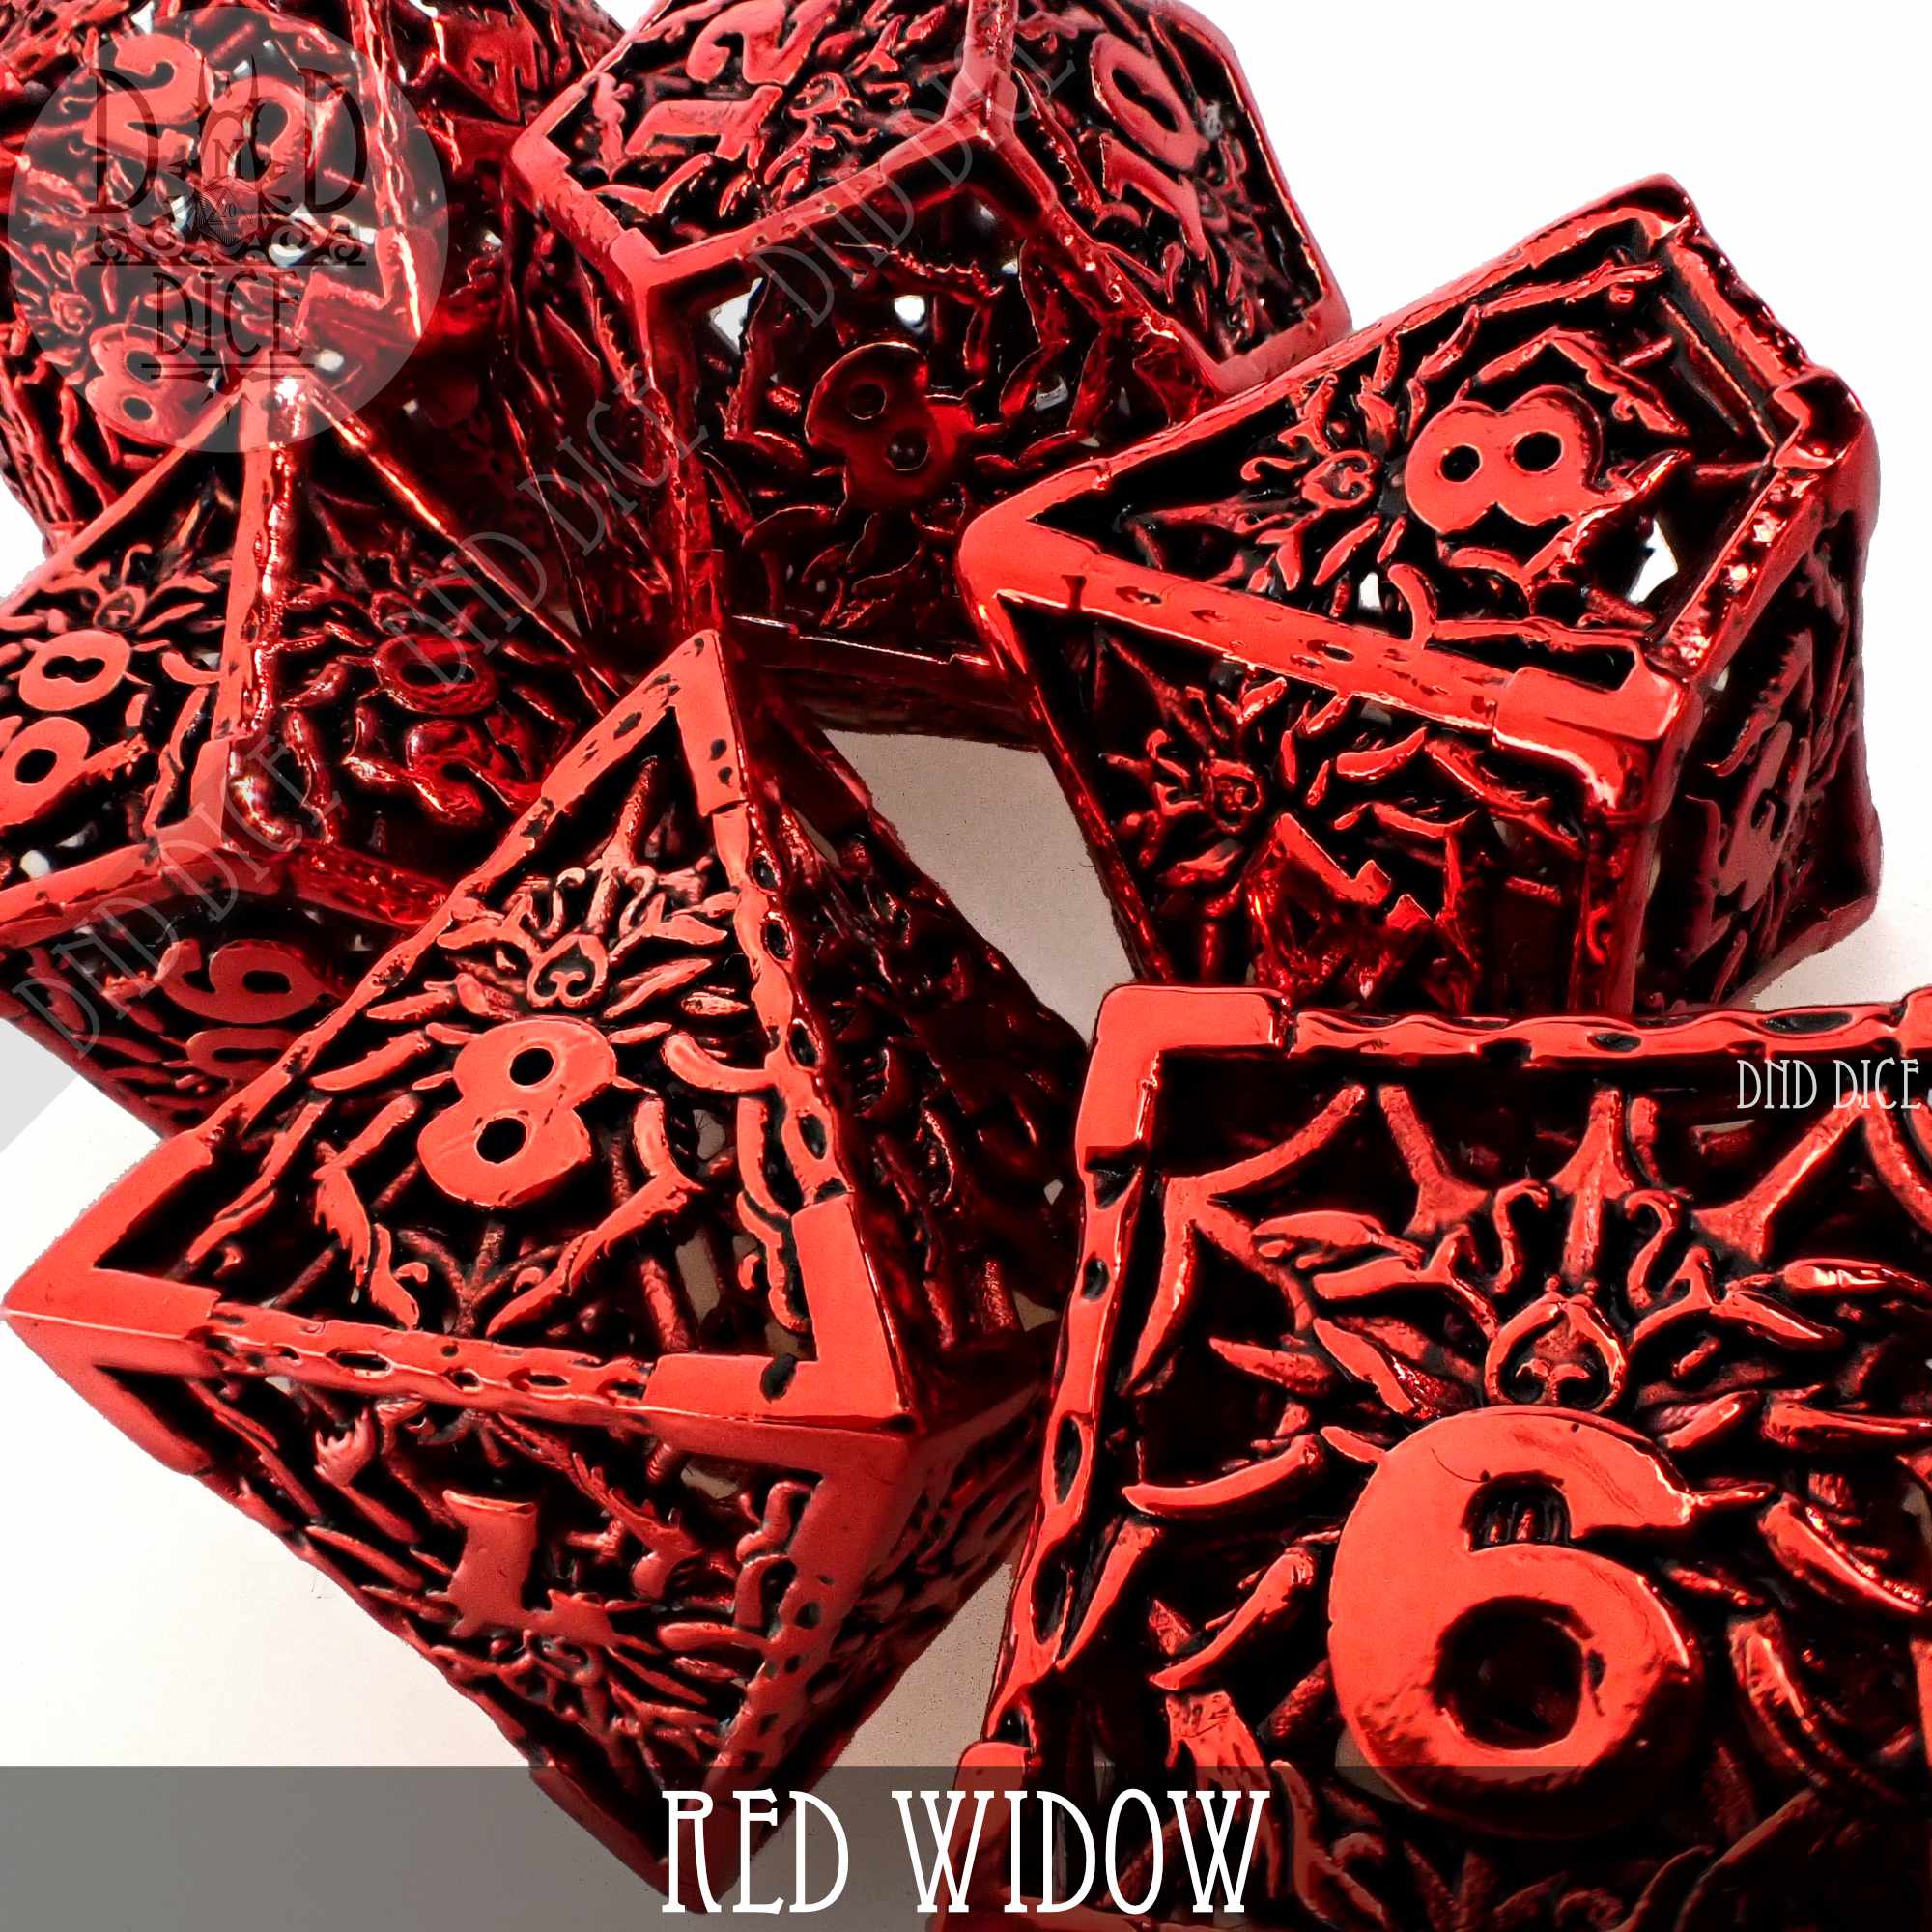 Red Widow Spider - Metal (Gift Box)